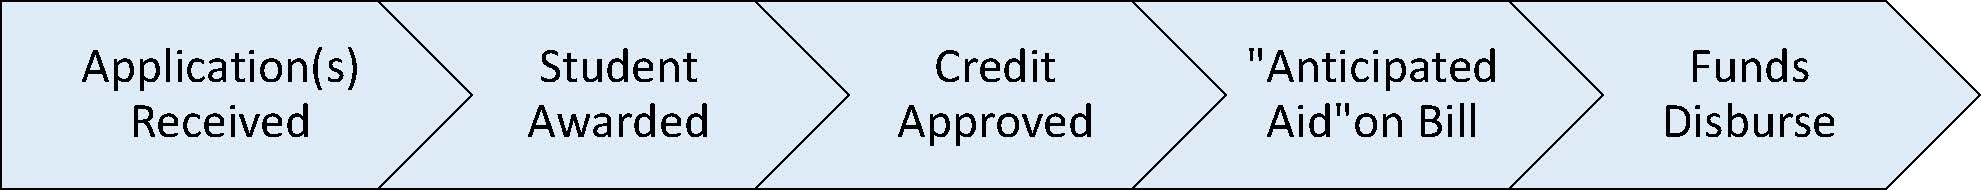 PLUS Loan Timeline: Application Received, Student Awarded, Credit Approved, "Anticipated Aid" on Bill, Funds Disburse